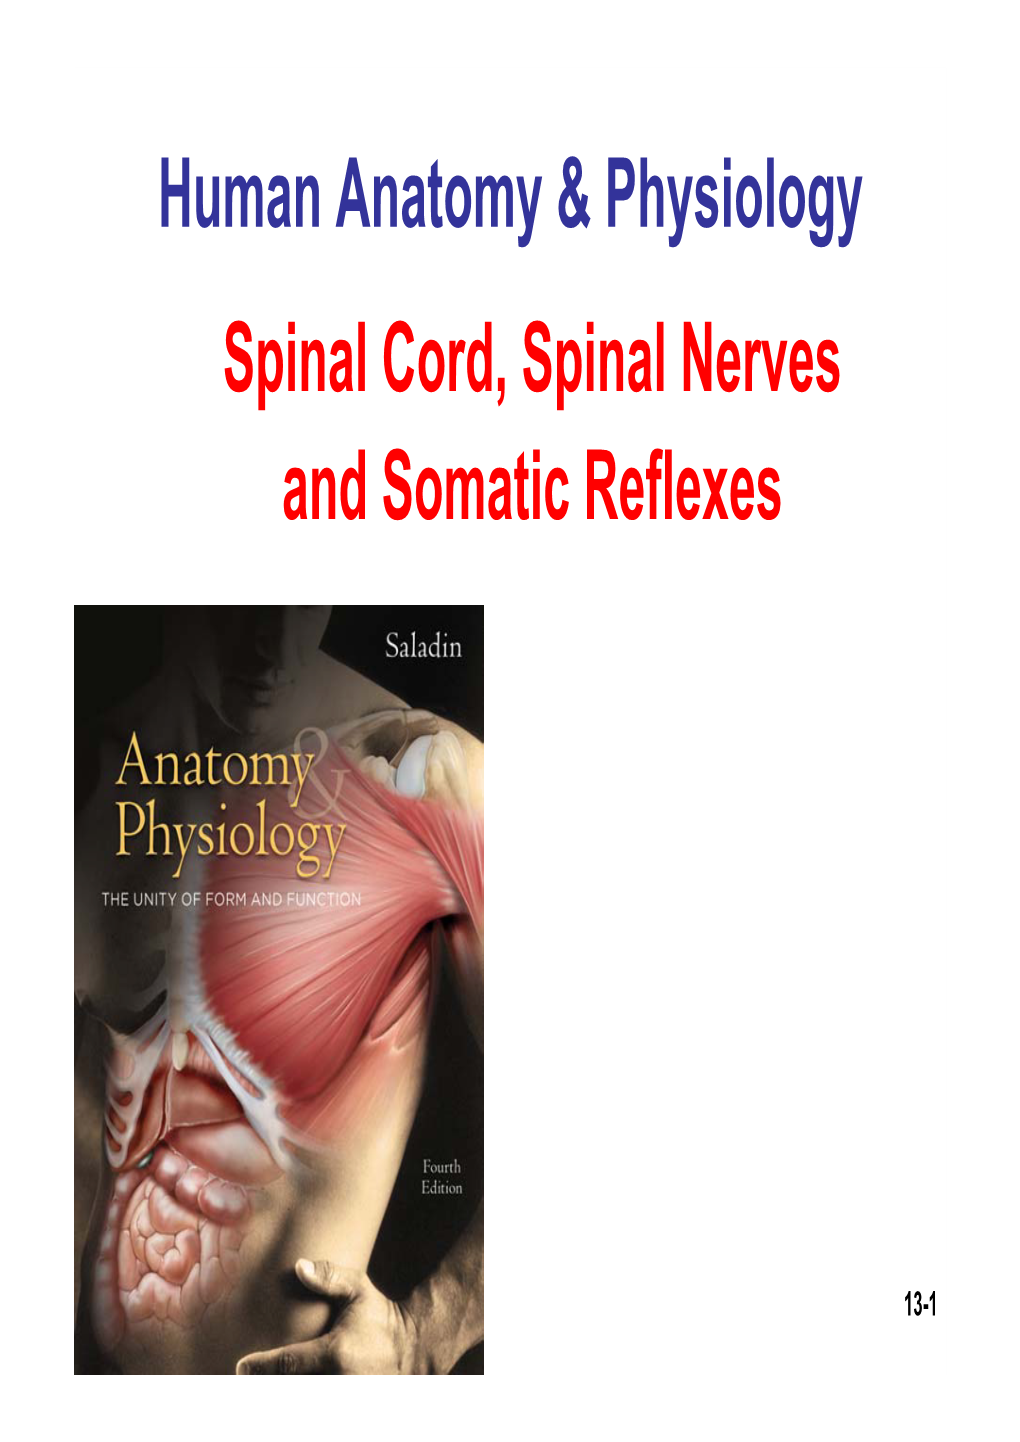 Human Anatomy & Physiology Spinal Cord, Spinal